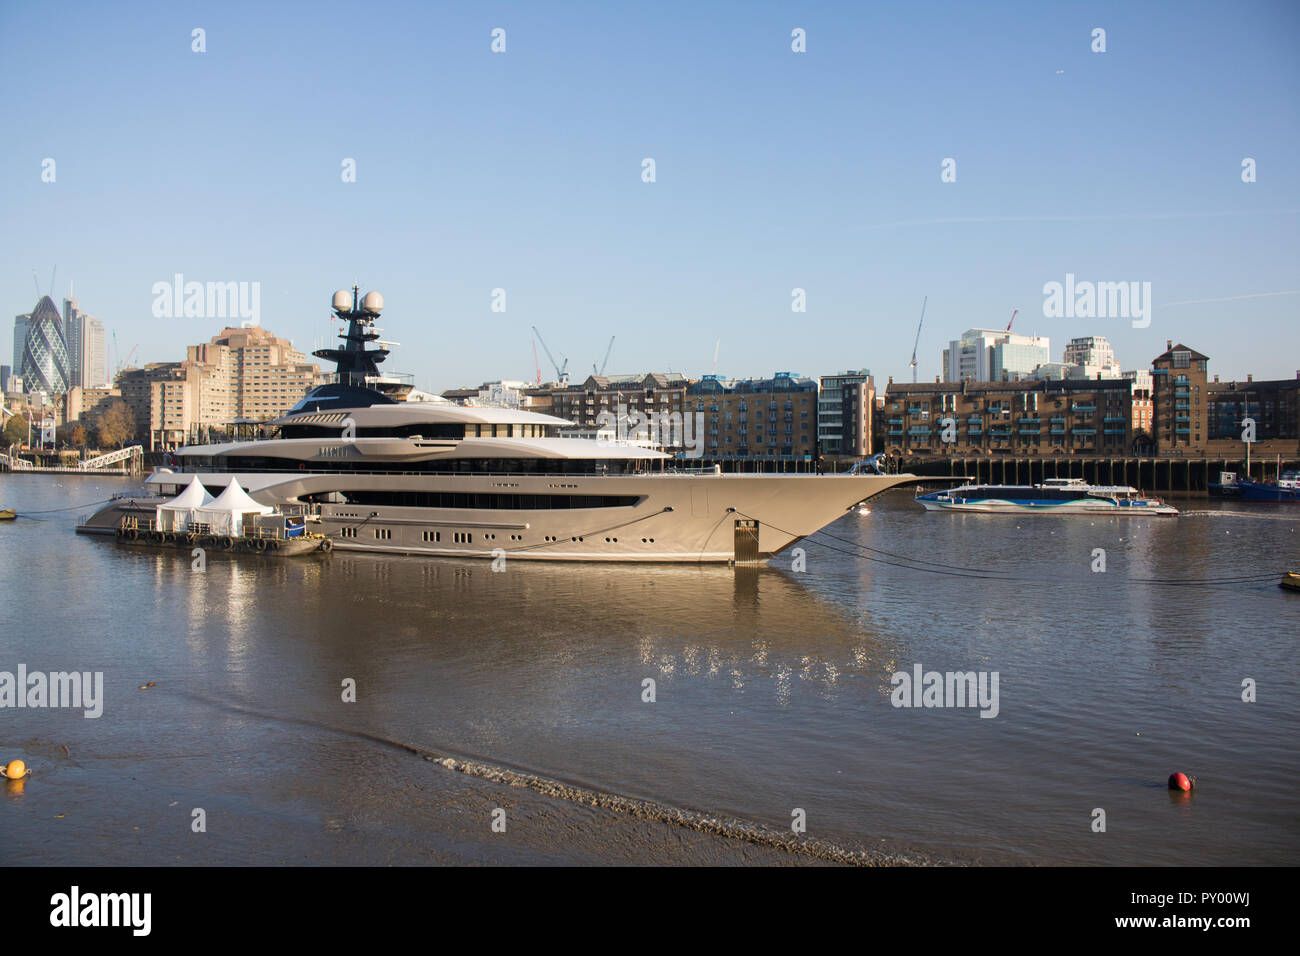 London UK. 25th October 2018. The Luxury 308ft superyacht 'Kismet' moored on the River Thames owned by  Pakistani-American billionaire Shahid Khan who is the  owner of the NFL Franchise Jacksonville Jaguars  Shahid Khan is ranked 70th in the Forbes 400 list of richest Americans, and is overall the 221st wealthiest person in the worldCredit: amer ghazzal/Alamy Live News Stock Photo